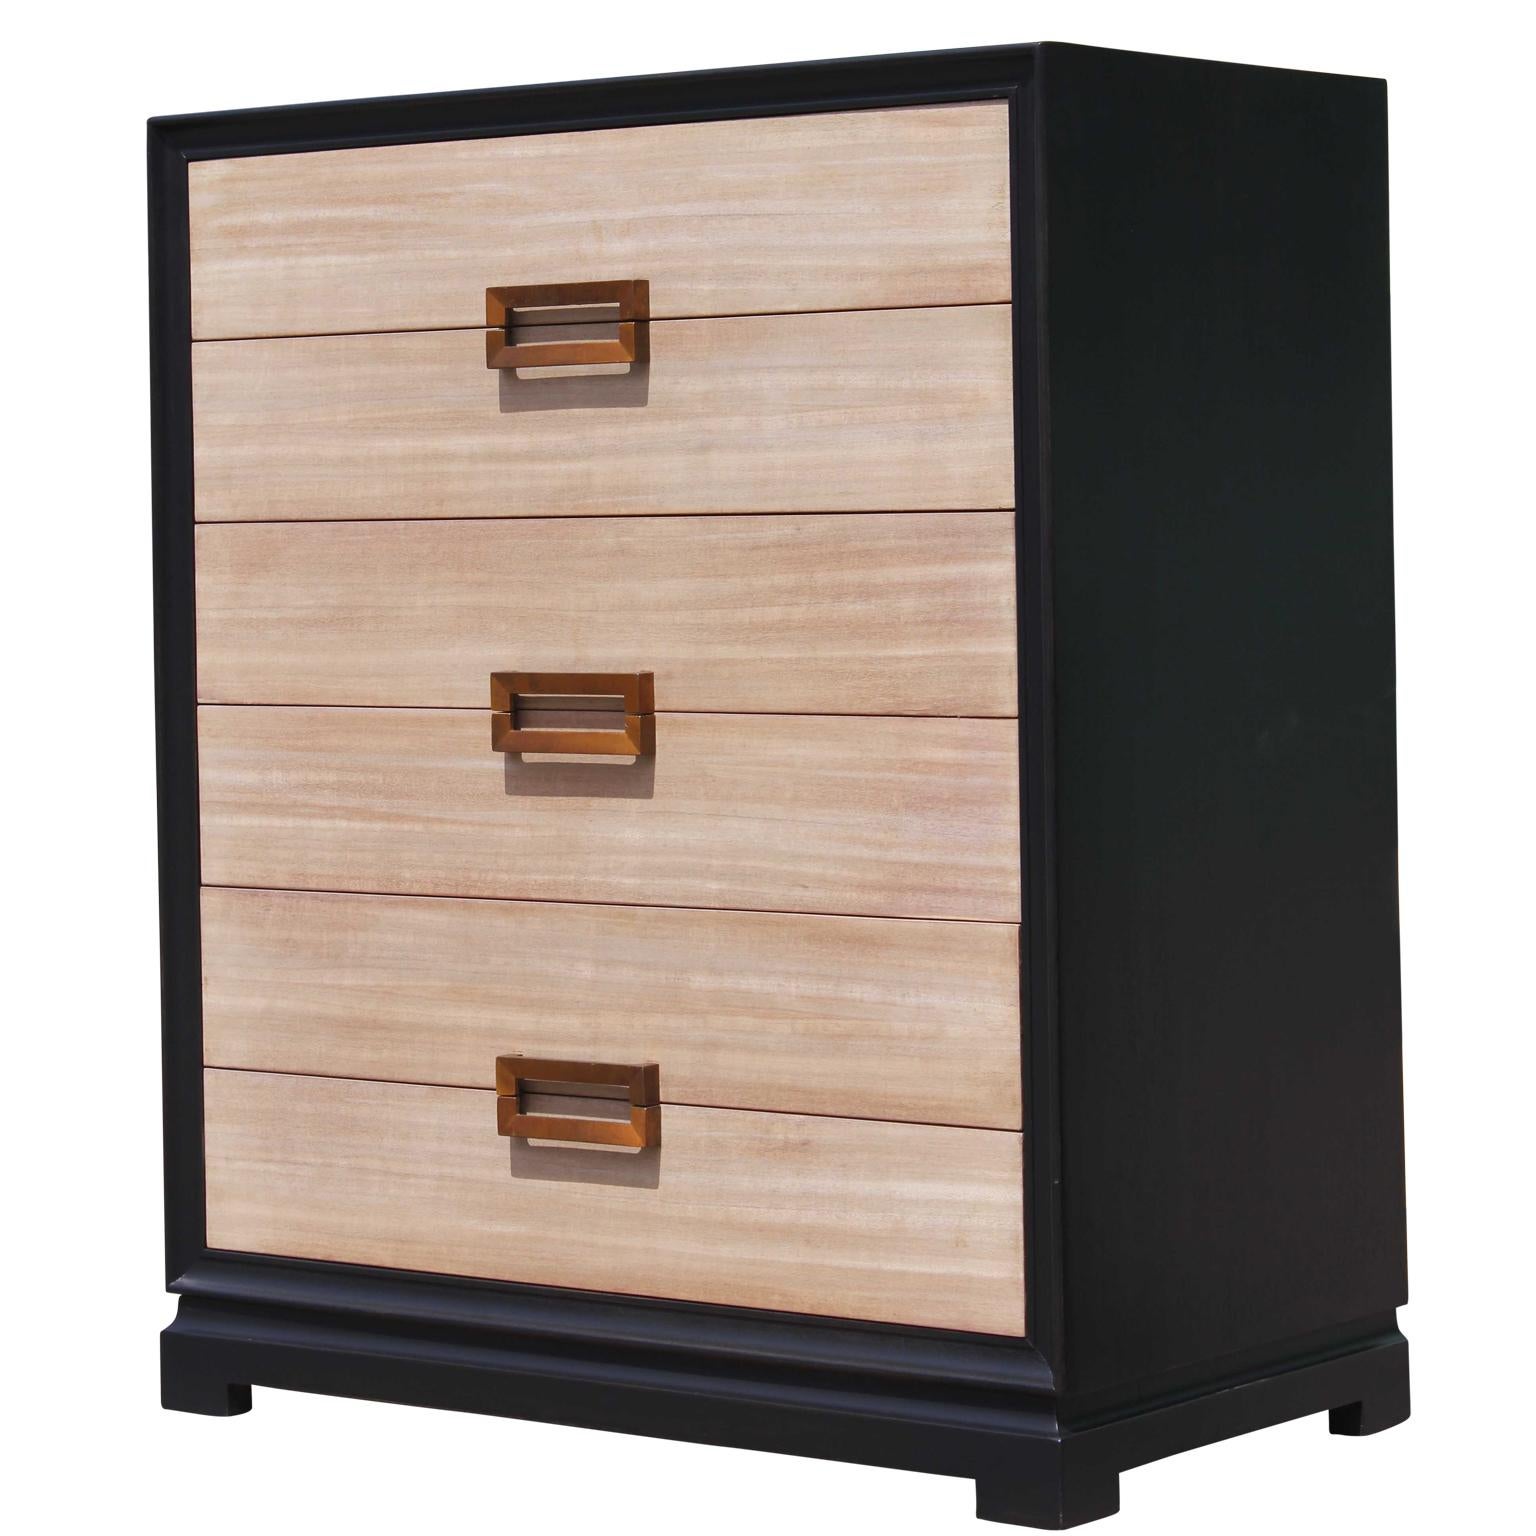 Modern two-tone six-drawer chest of drawers with a neutral finish on the front of the drawers with brass pulls. In the style of Grosfeld House or Dunbar.